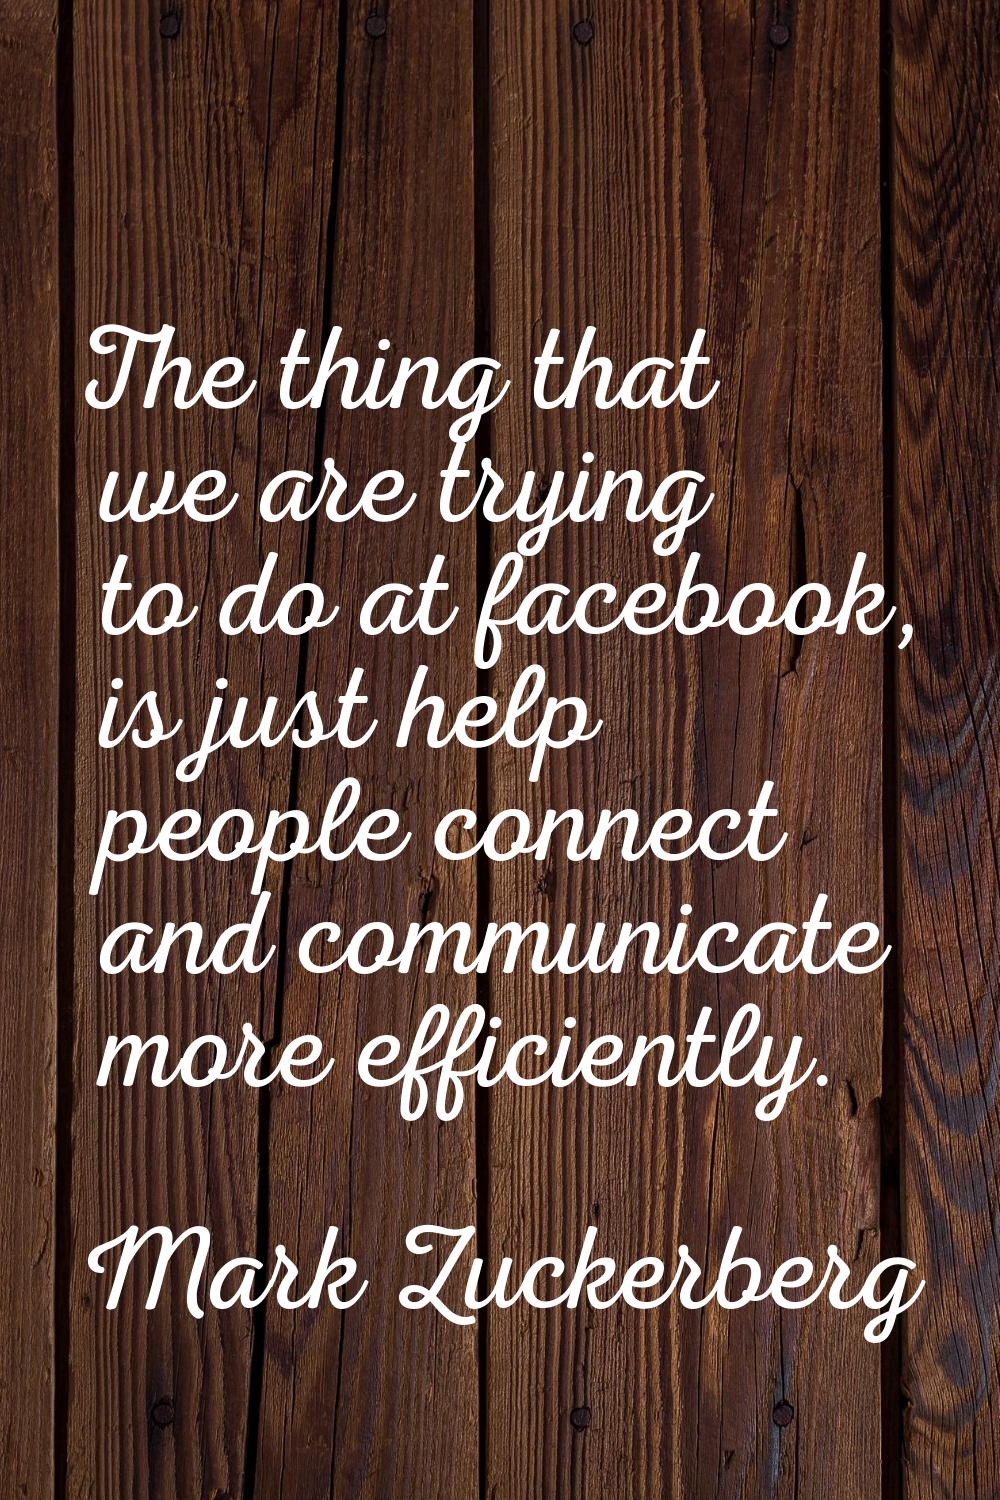 The thing that we are trying to do at facebook, is just help people connect and communicate more ef